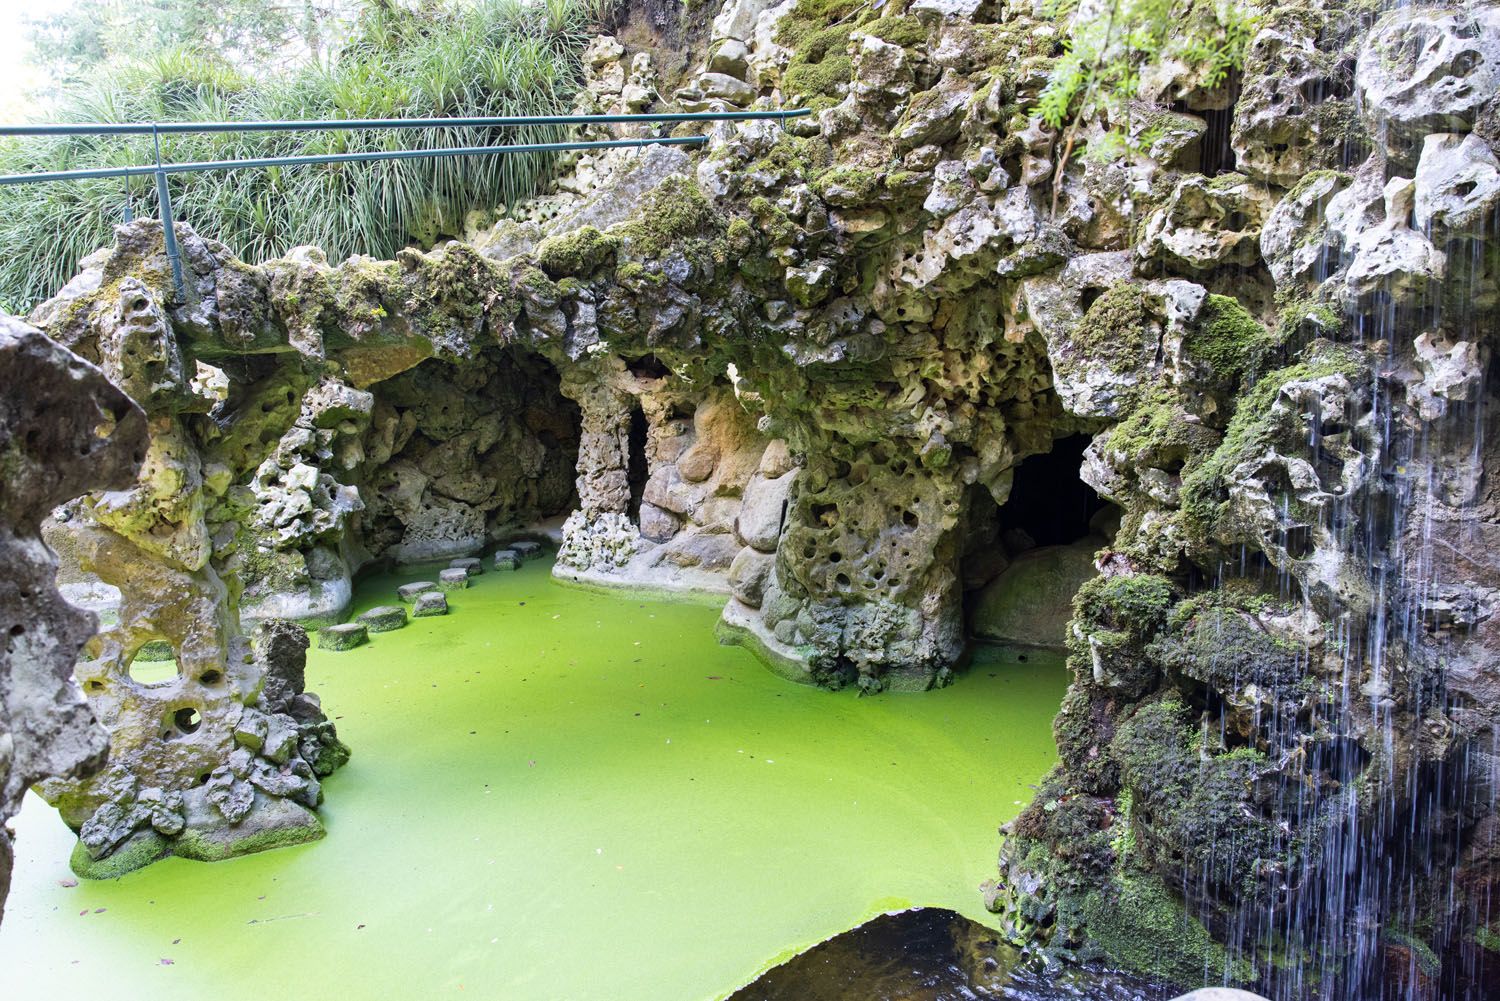 Green Pool Quinta da Regaleira | Best Things to Do in Sintra